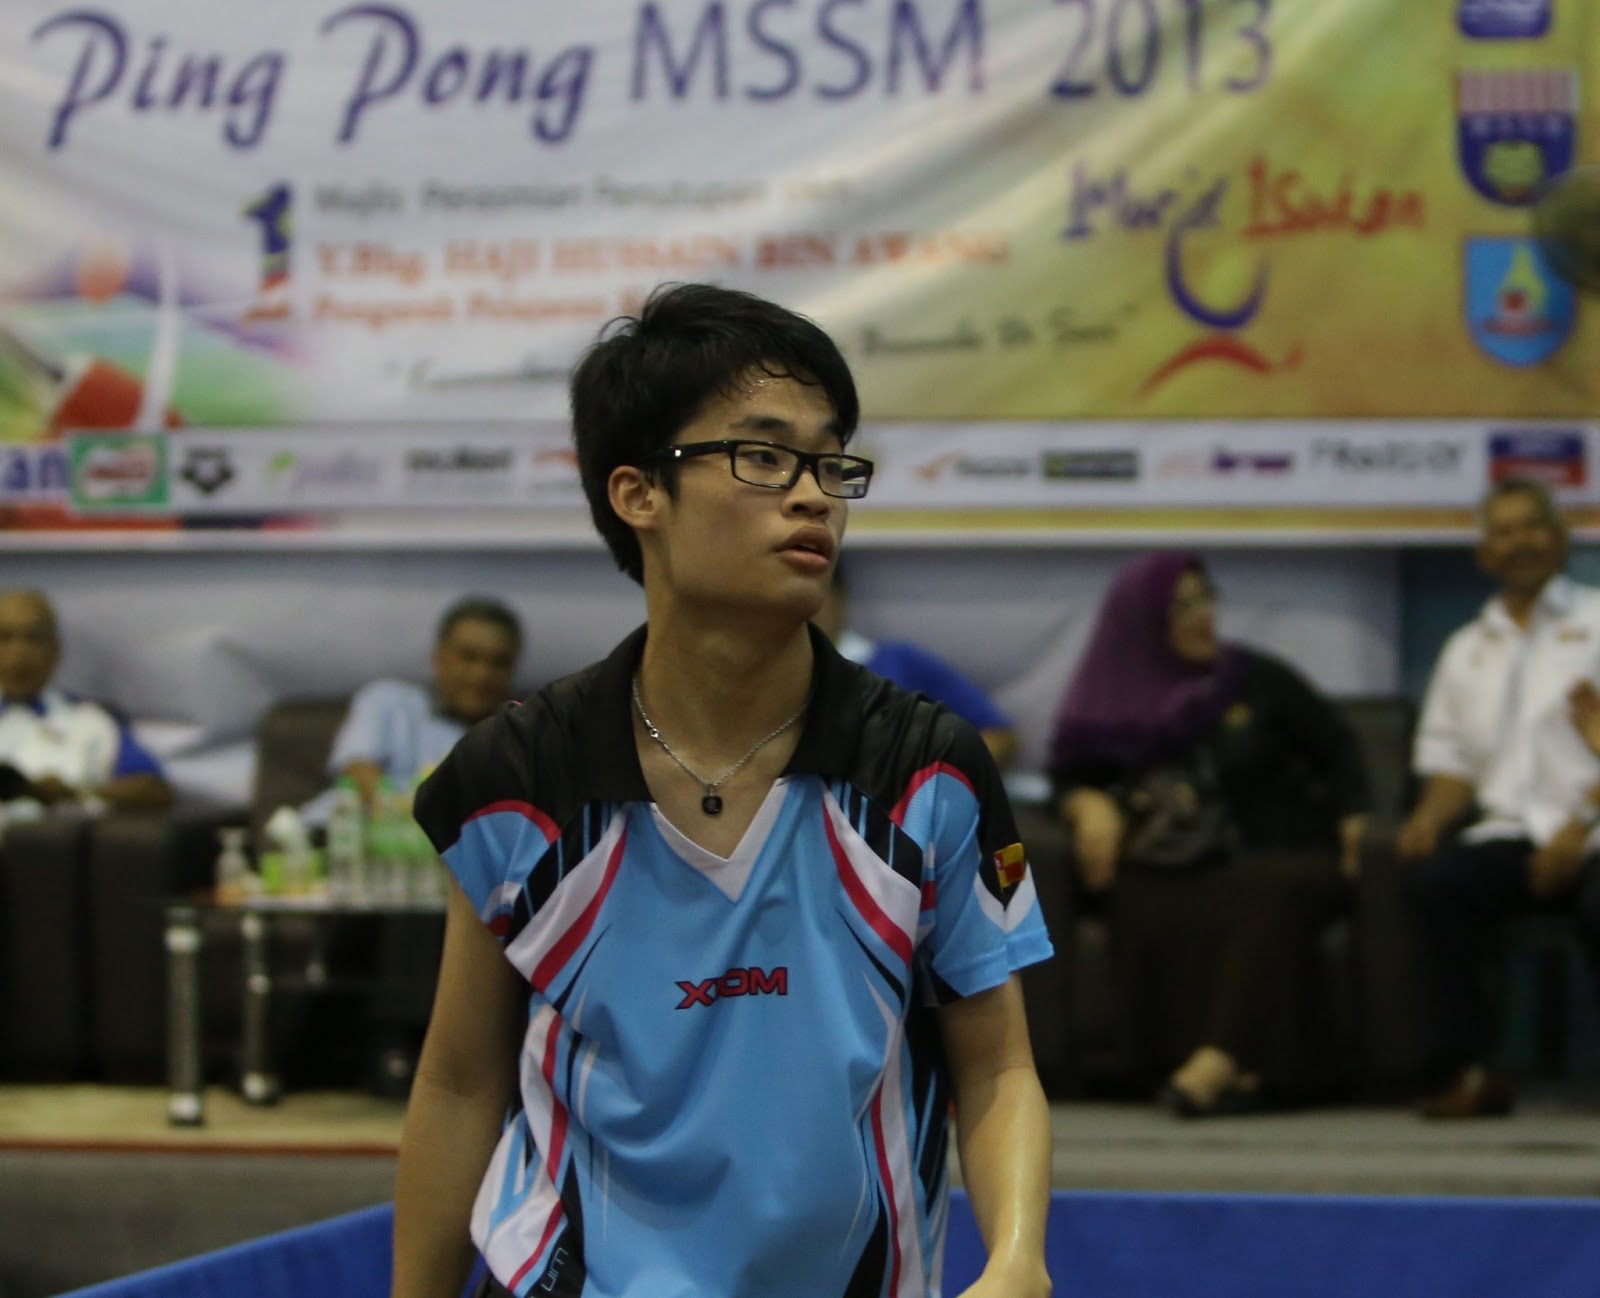 MSSM Ping pong: March 2013